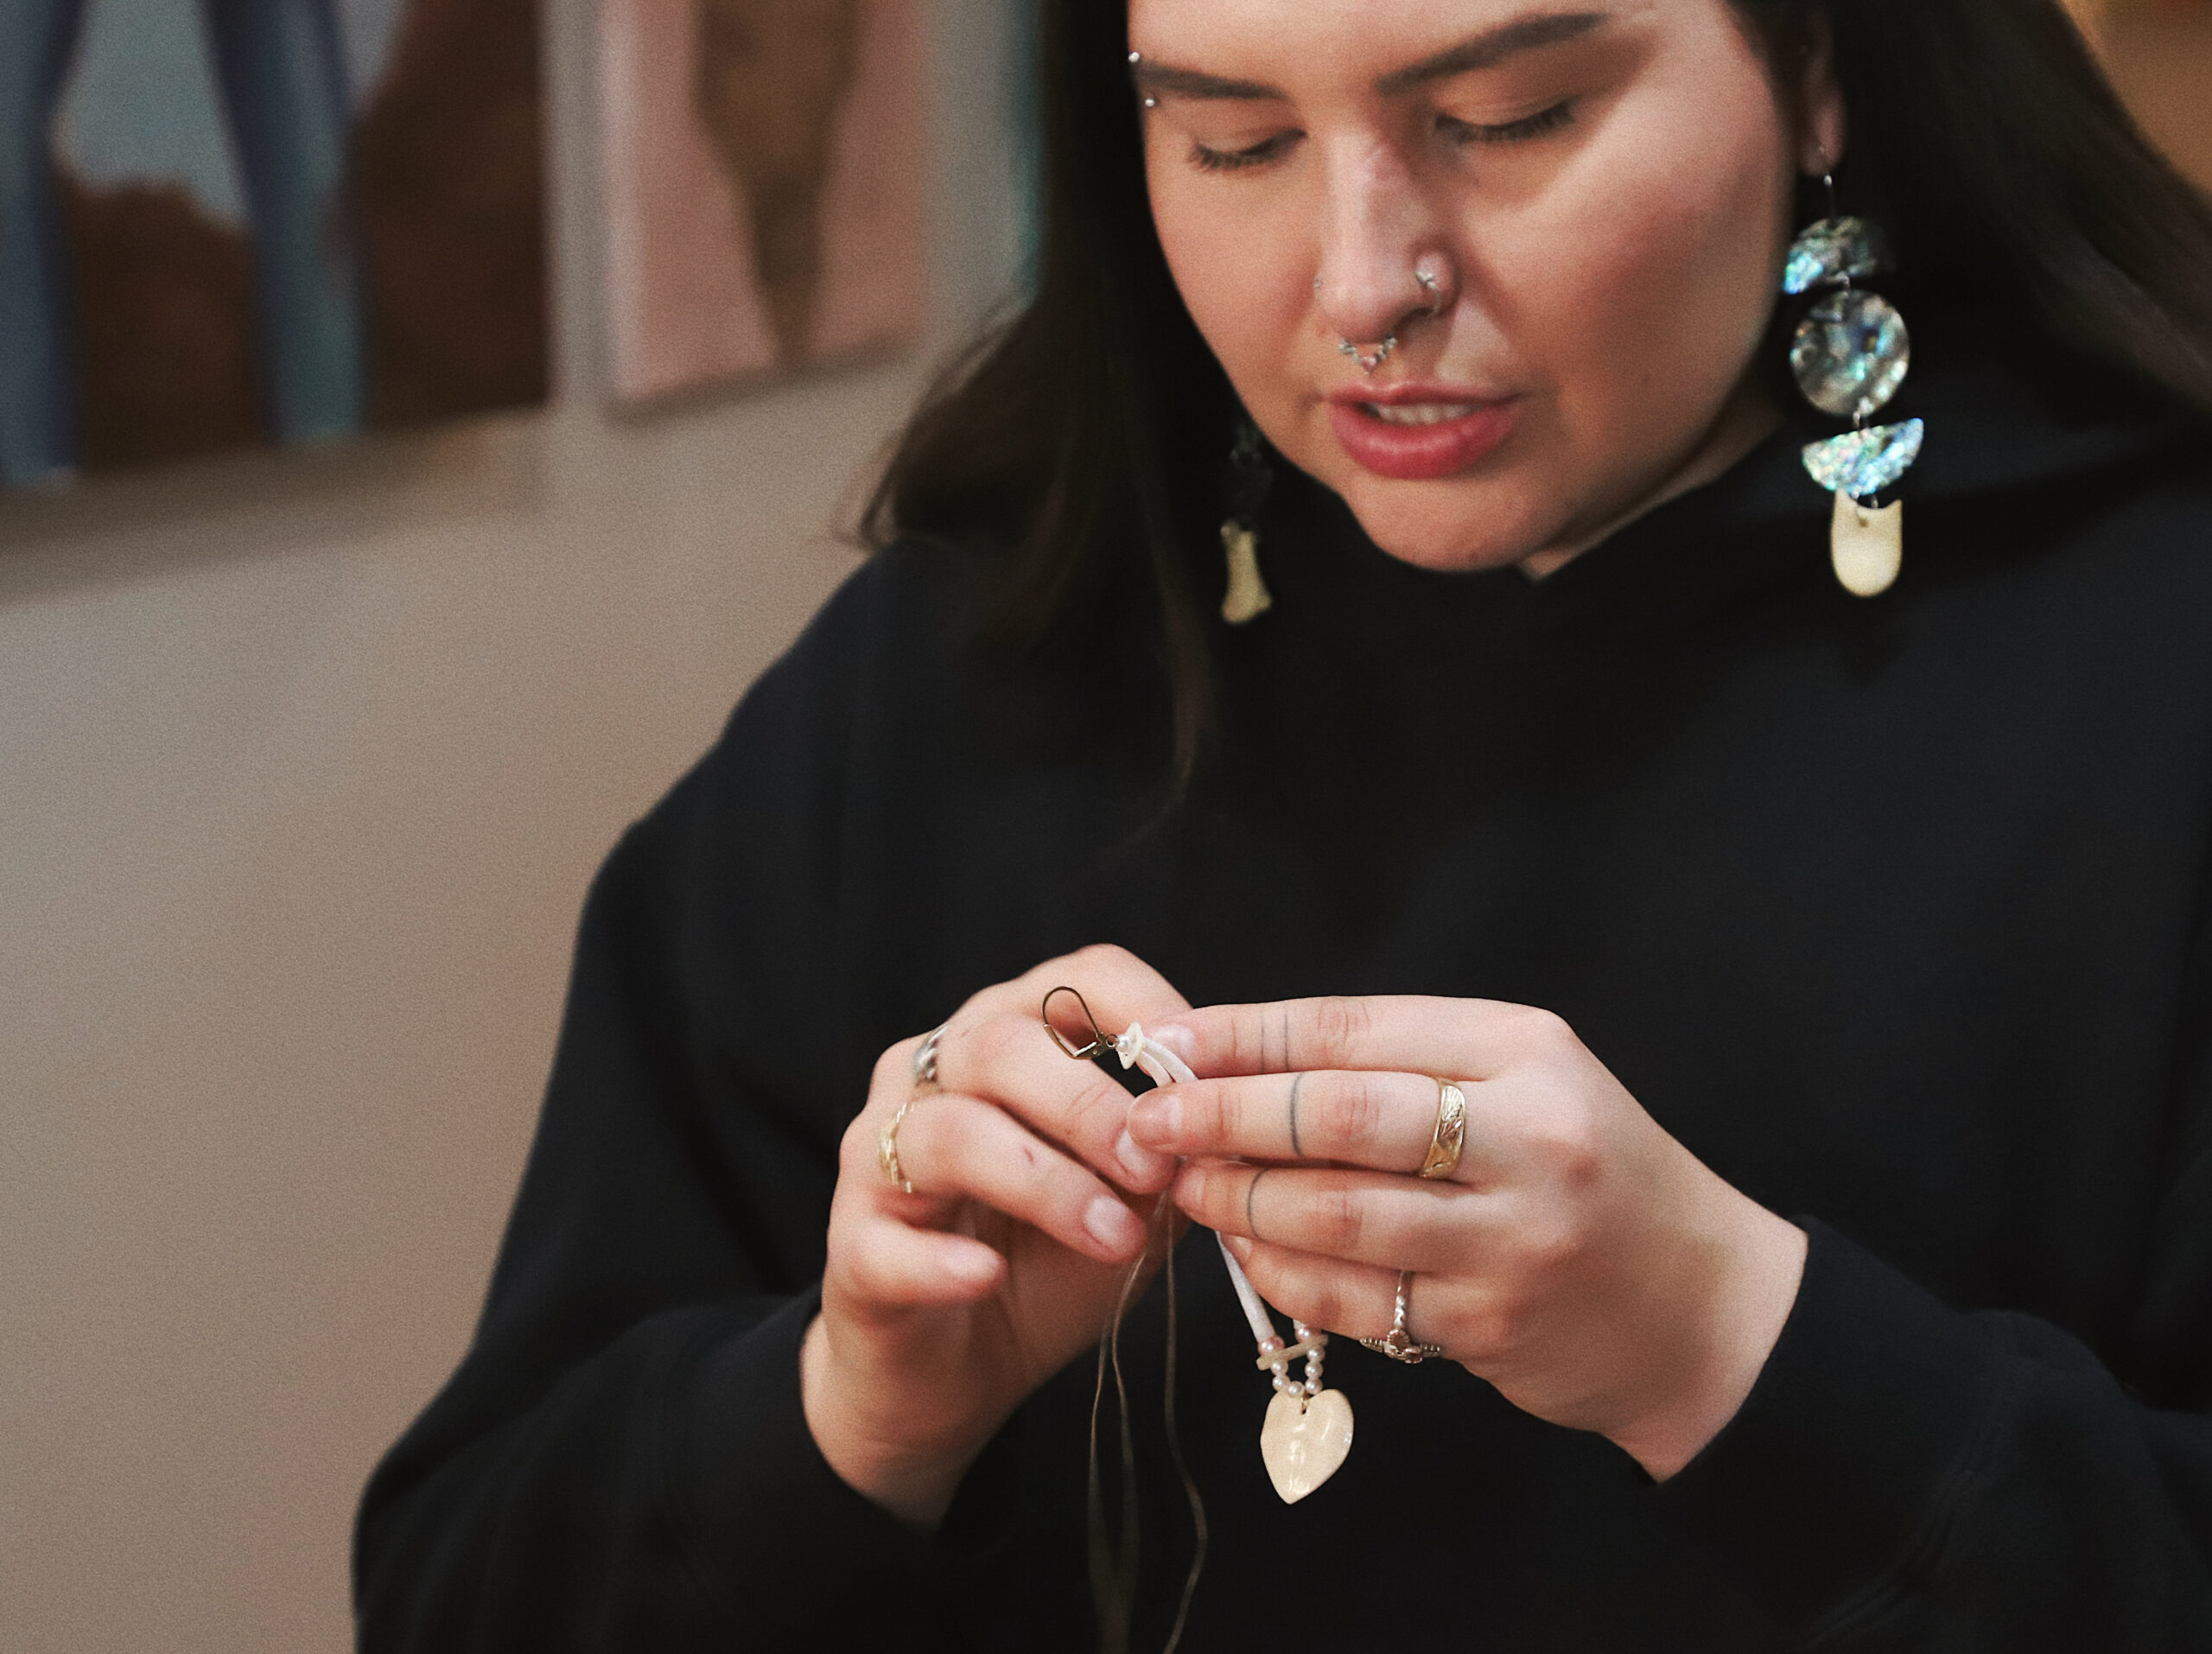 A person of medium skin tone with dark long hair, wearing a black hooded sweatshirt, works with their hands to make an earring.